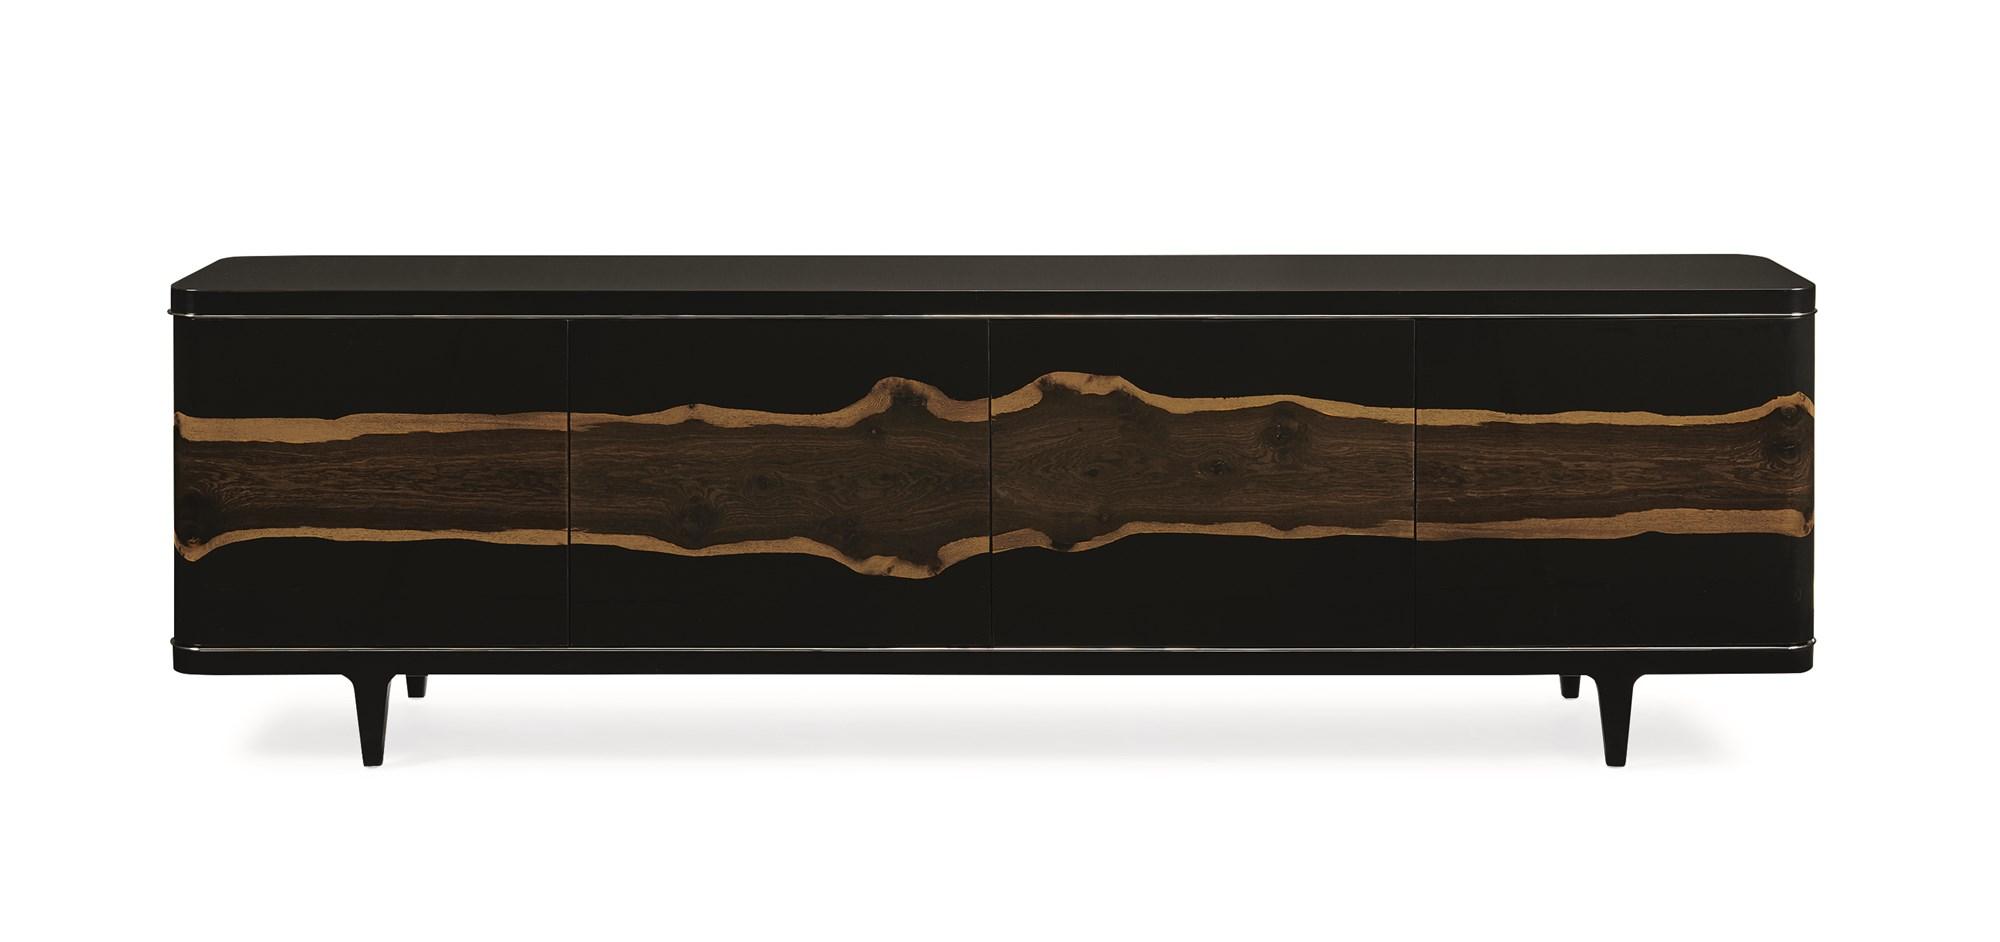 

    
Piano Black & Natural Oak THE NATURALIST ENTERTAINMENT CONSOLE by Caracole
